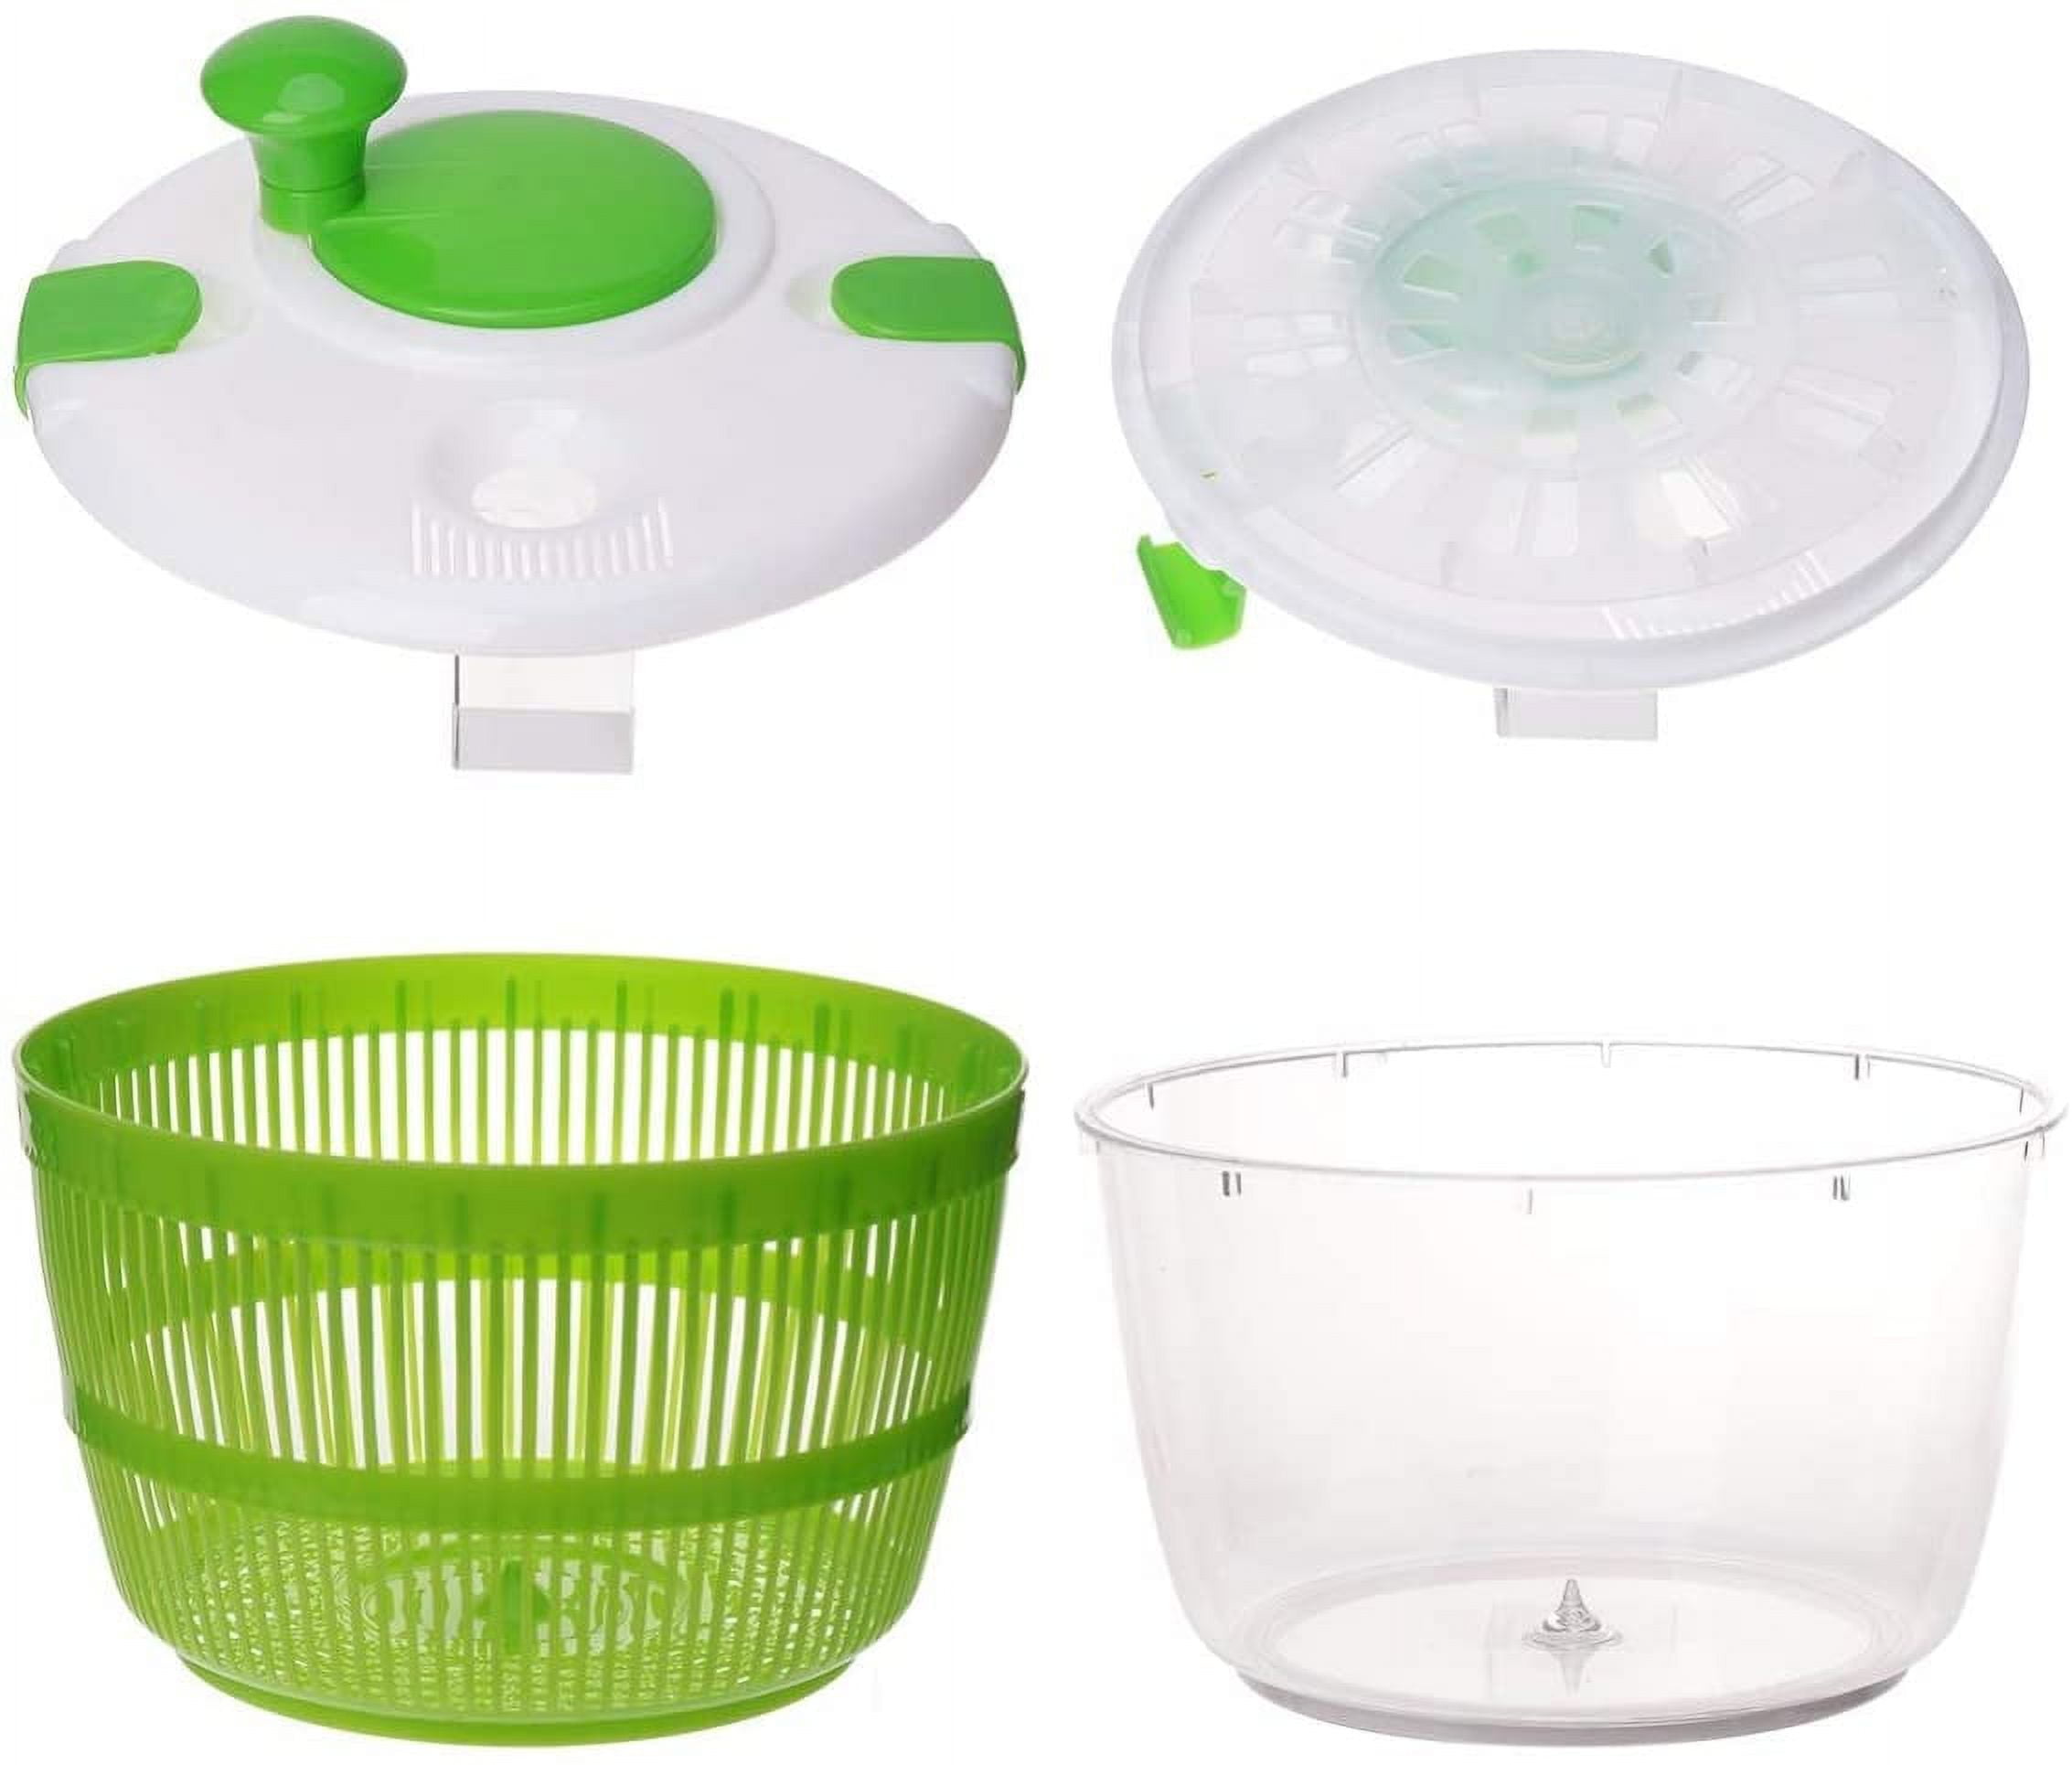 1pc Portable Mini Salad Spinner with Locking Lid and Handle -  Multifunctional Healthy Eating Tool for Large Salads and Dressings